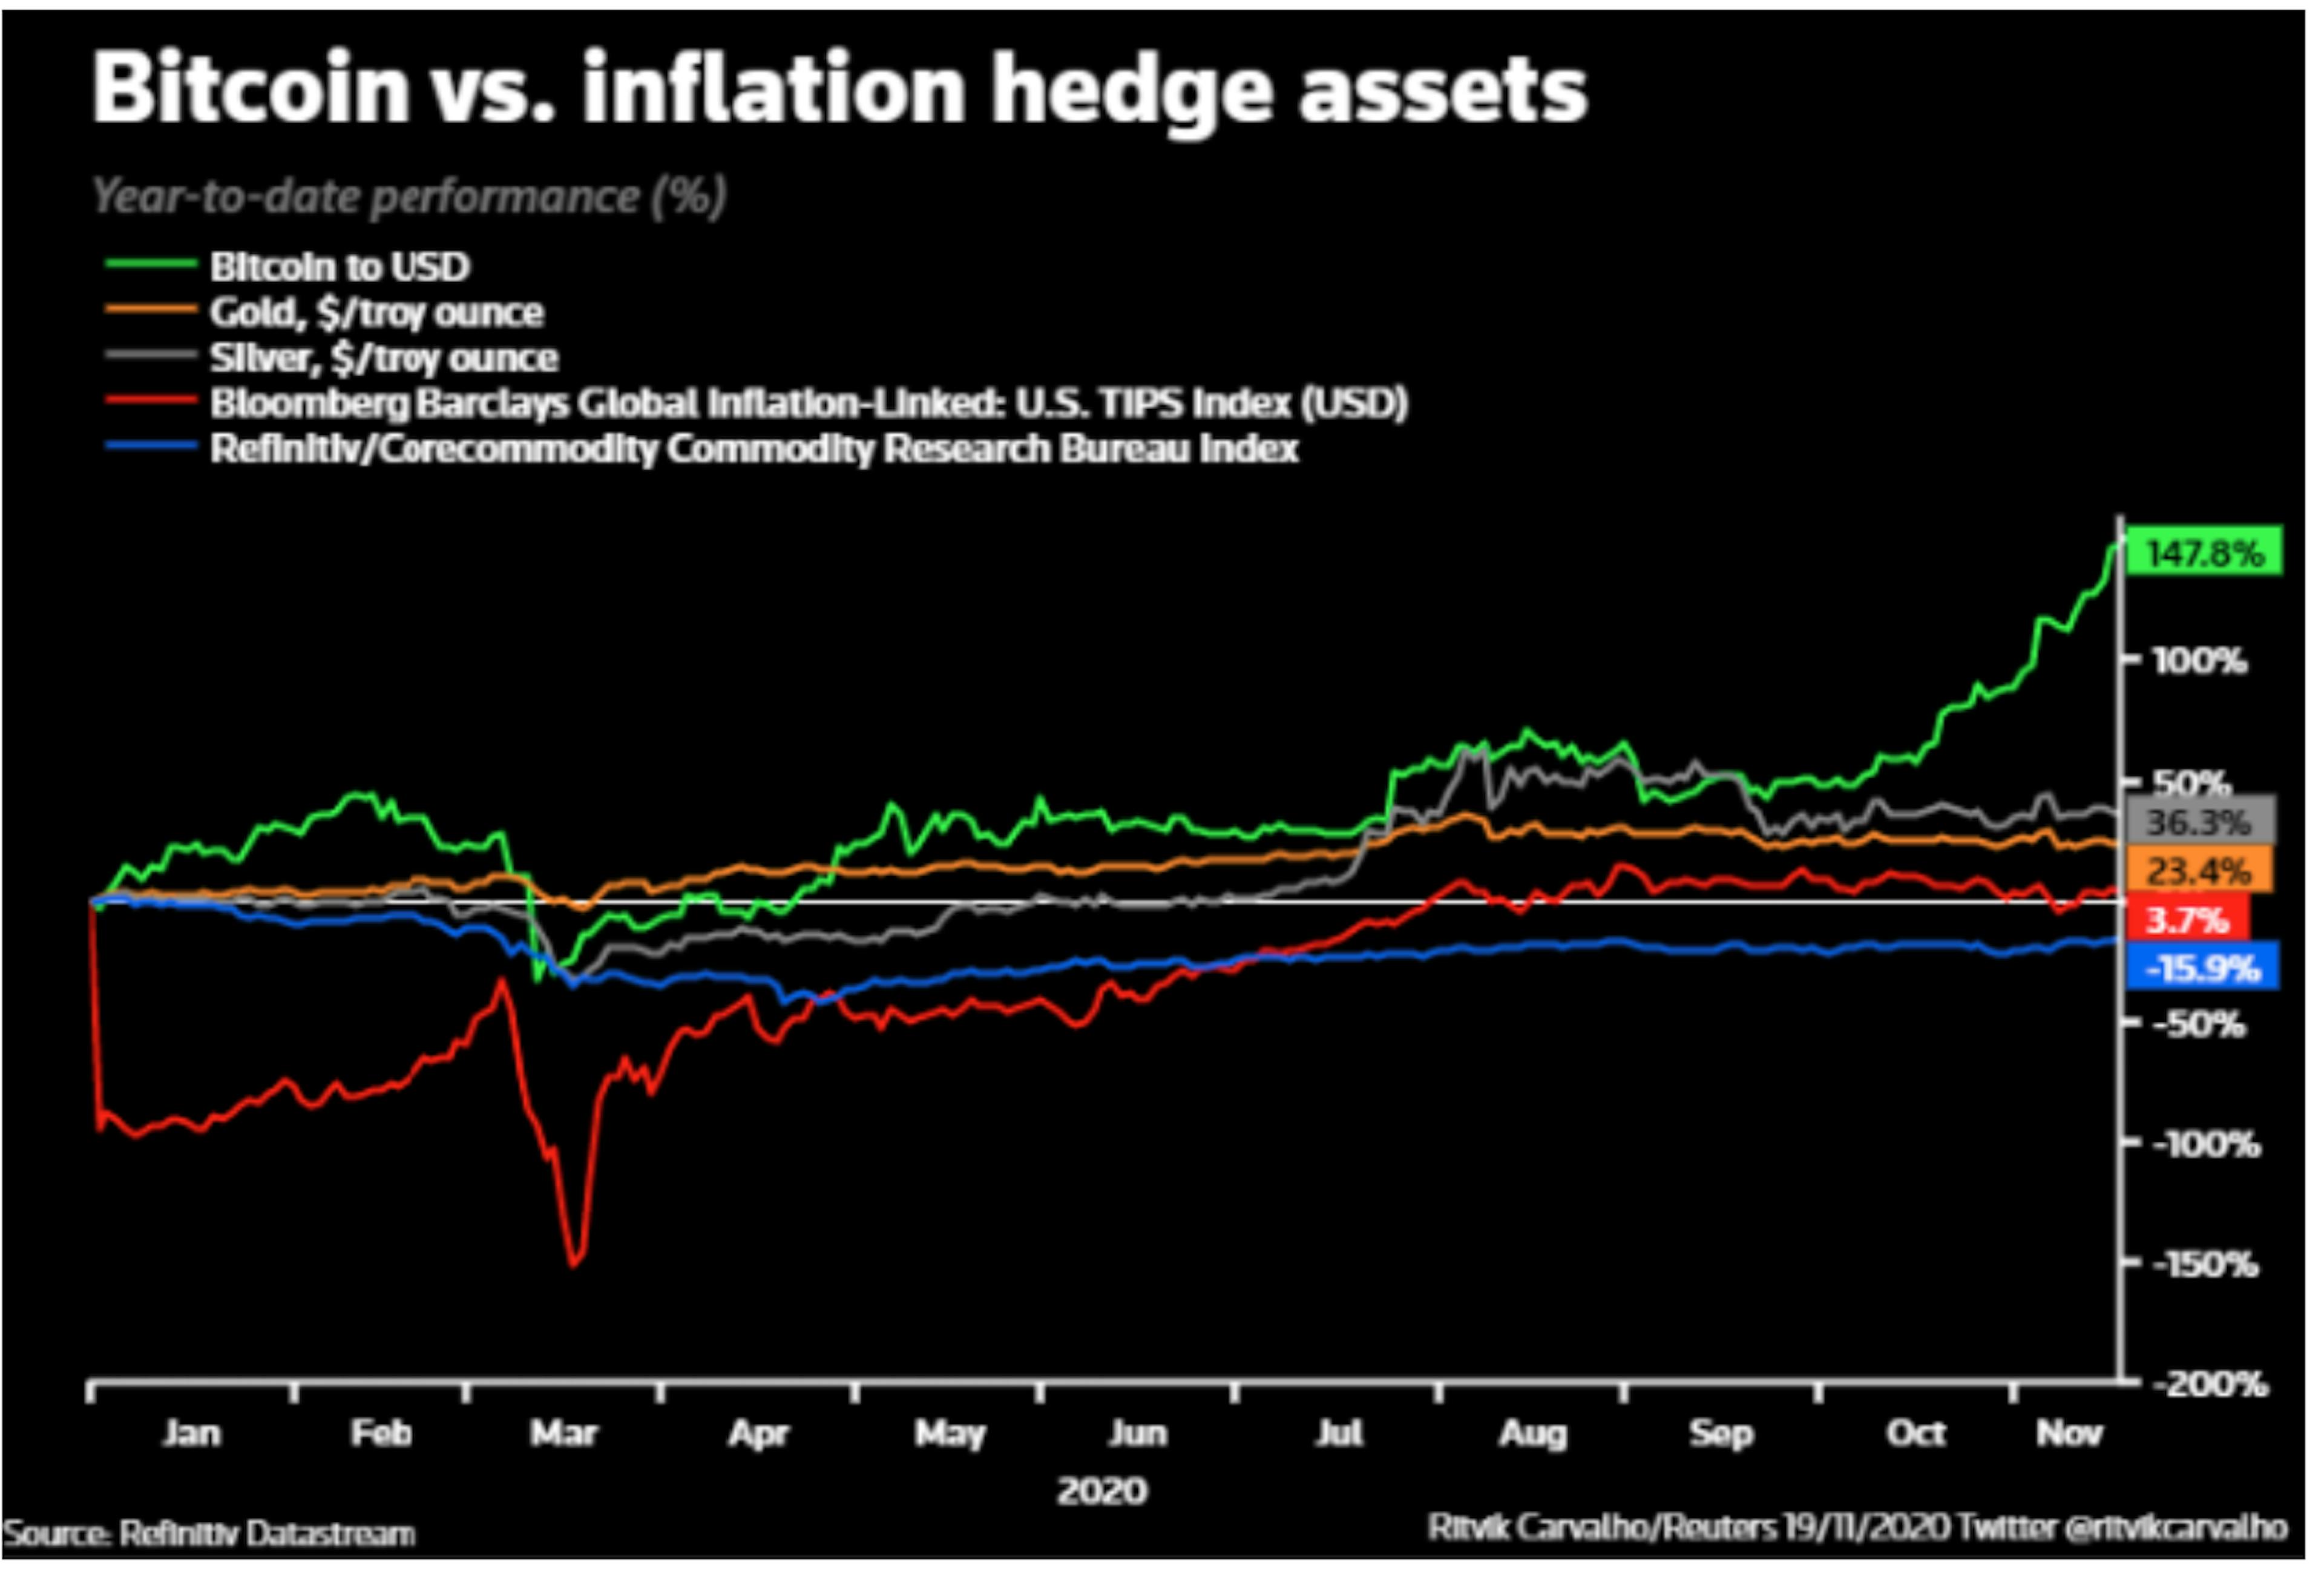 Bitcoin vs. inflation hedge assets